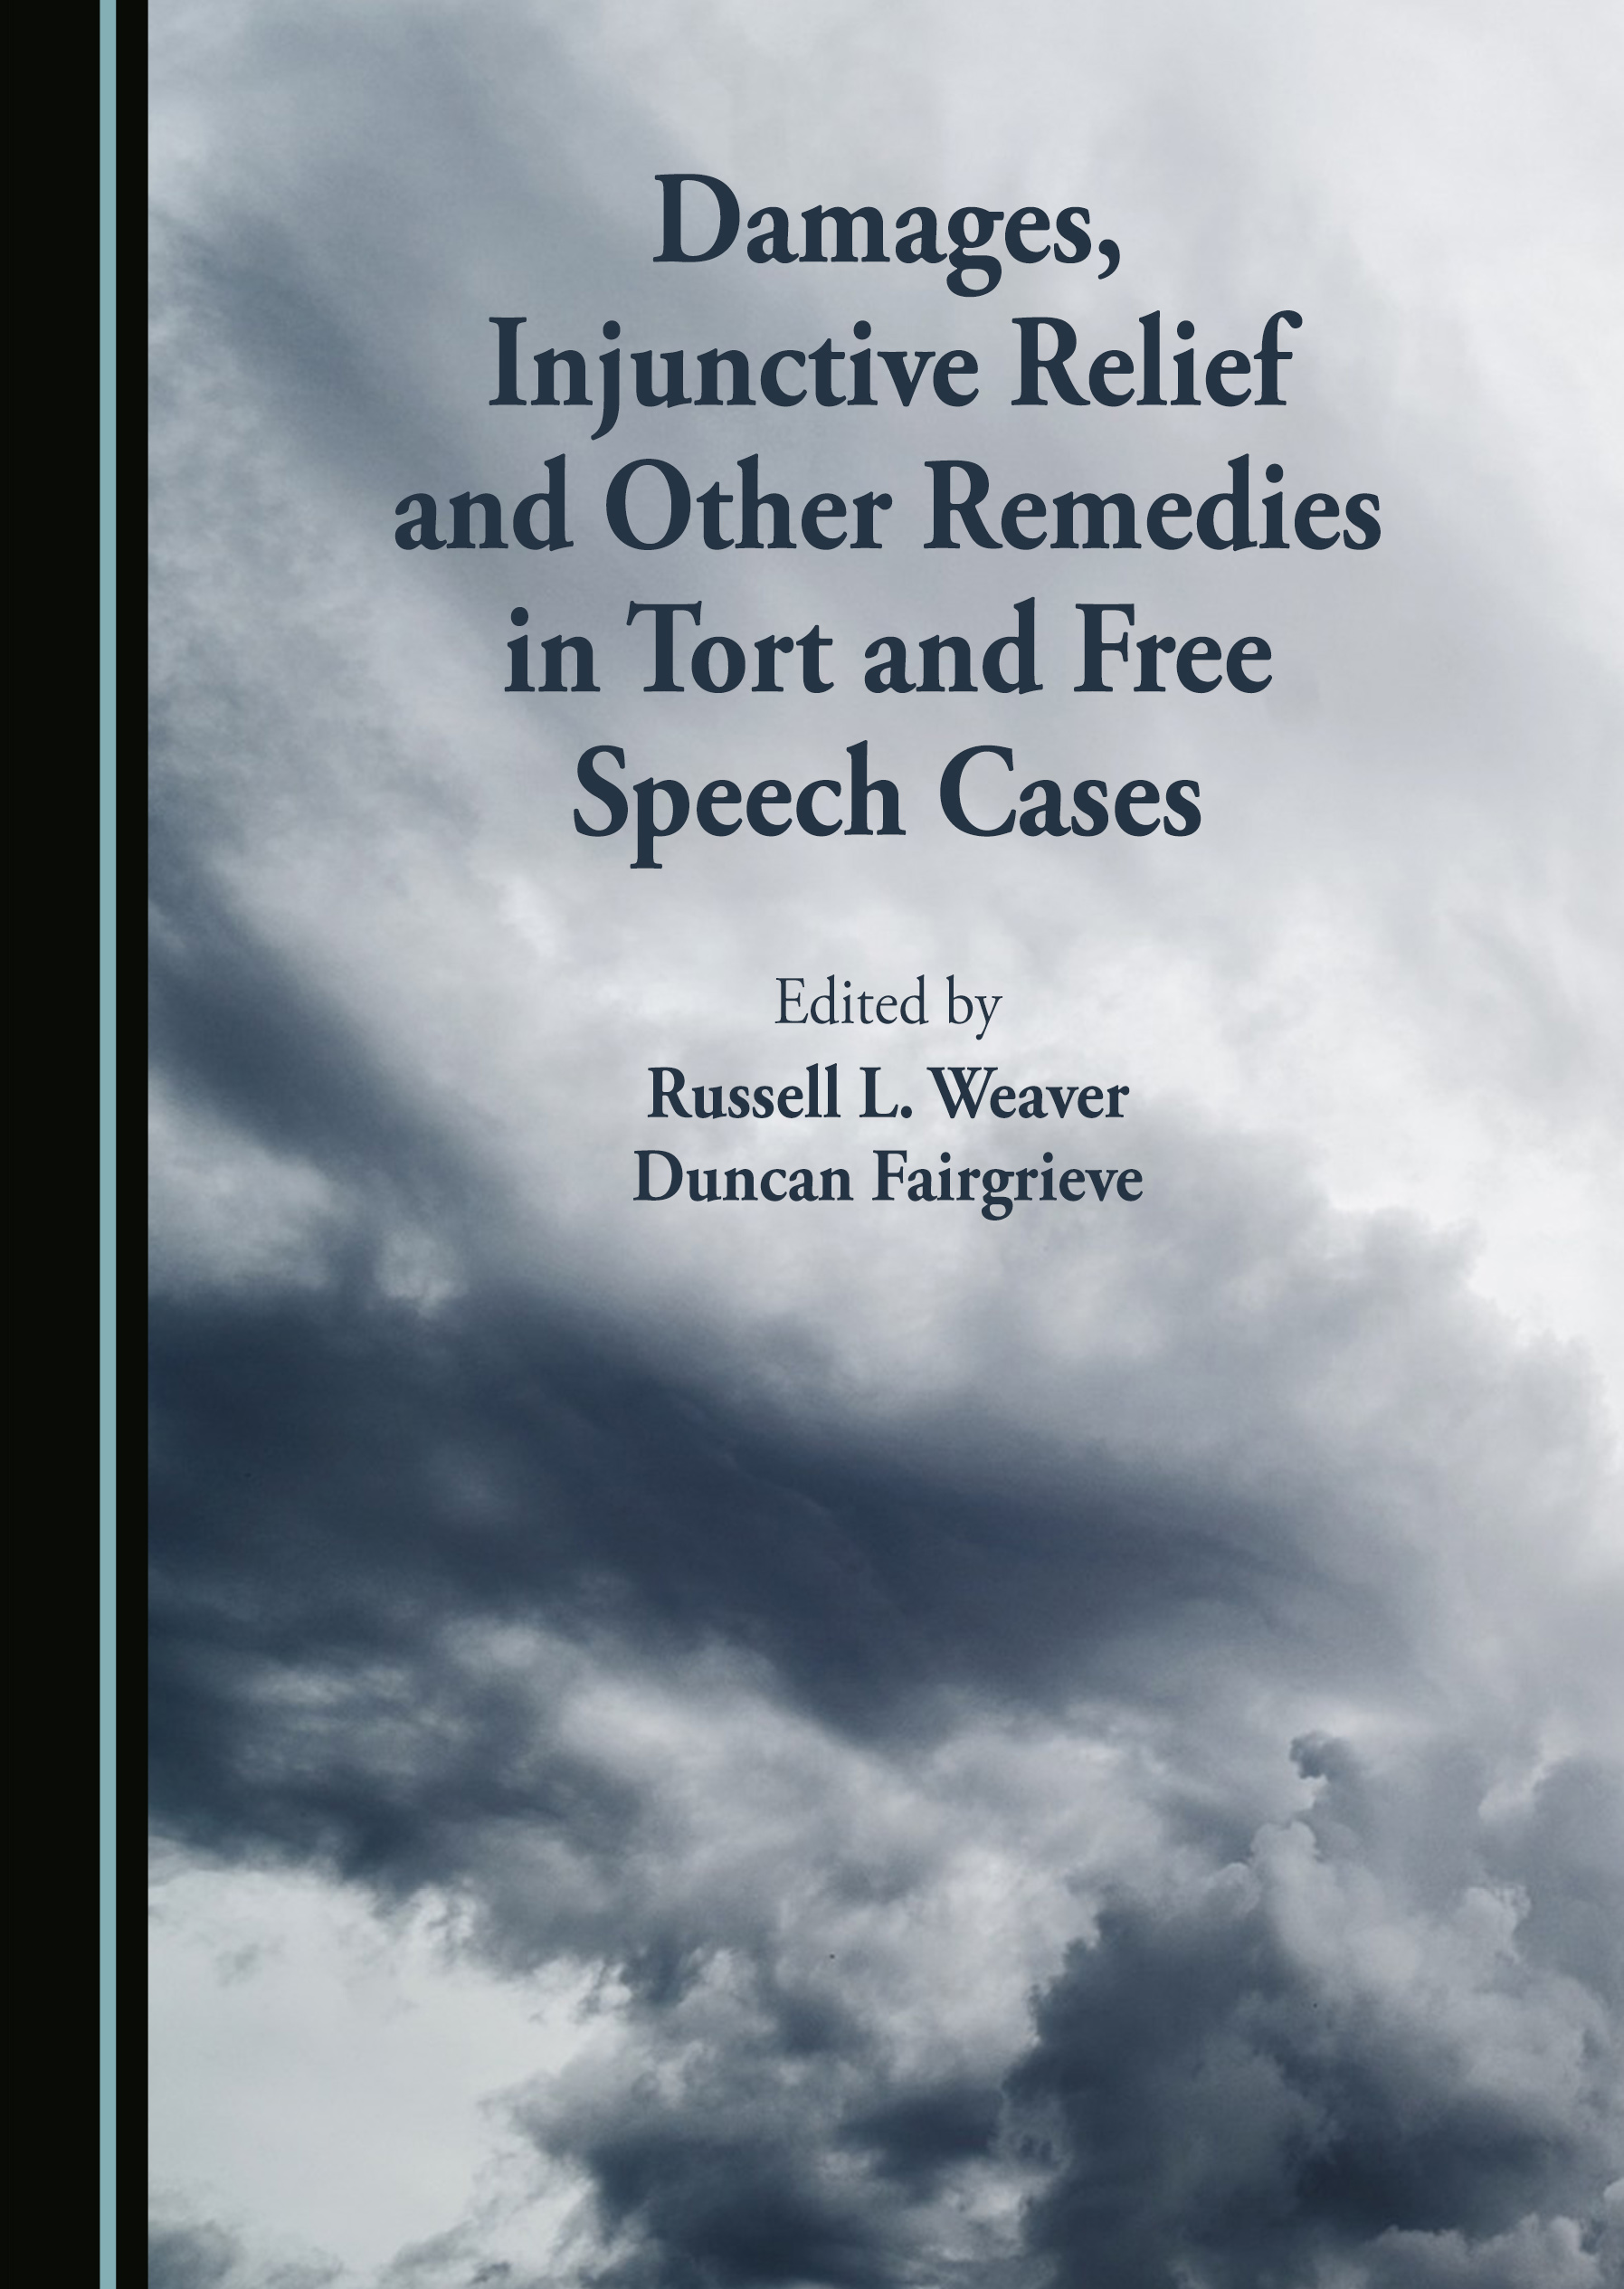 Damages, Injunctive Relief, and Other Remedies in Tort and Free Speech Cases